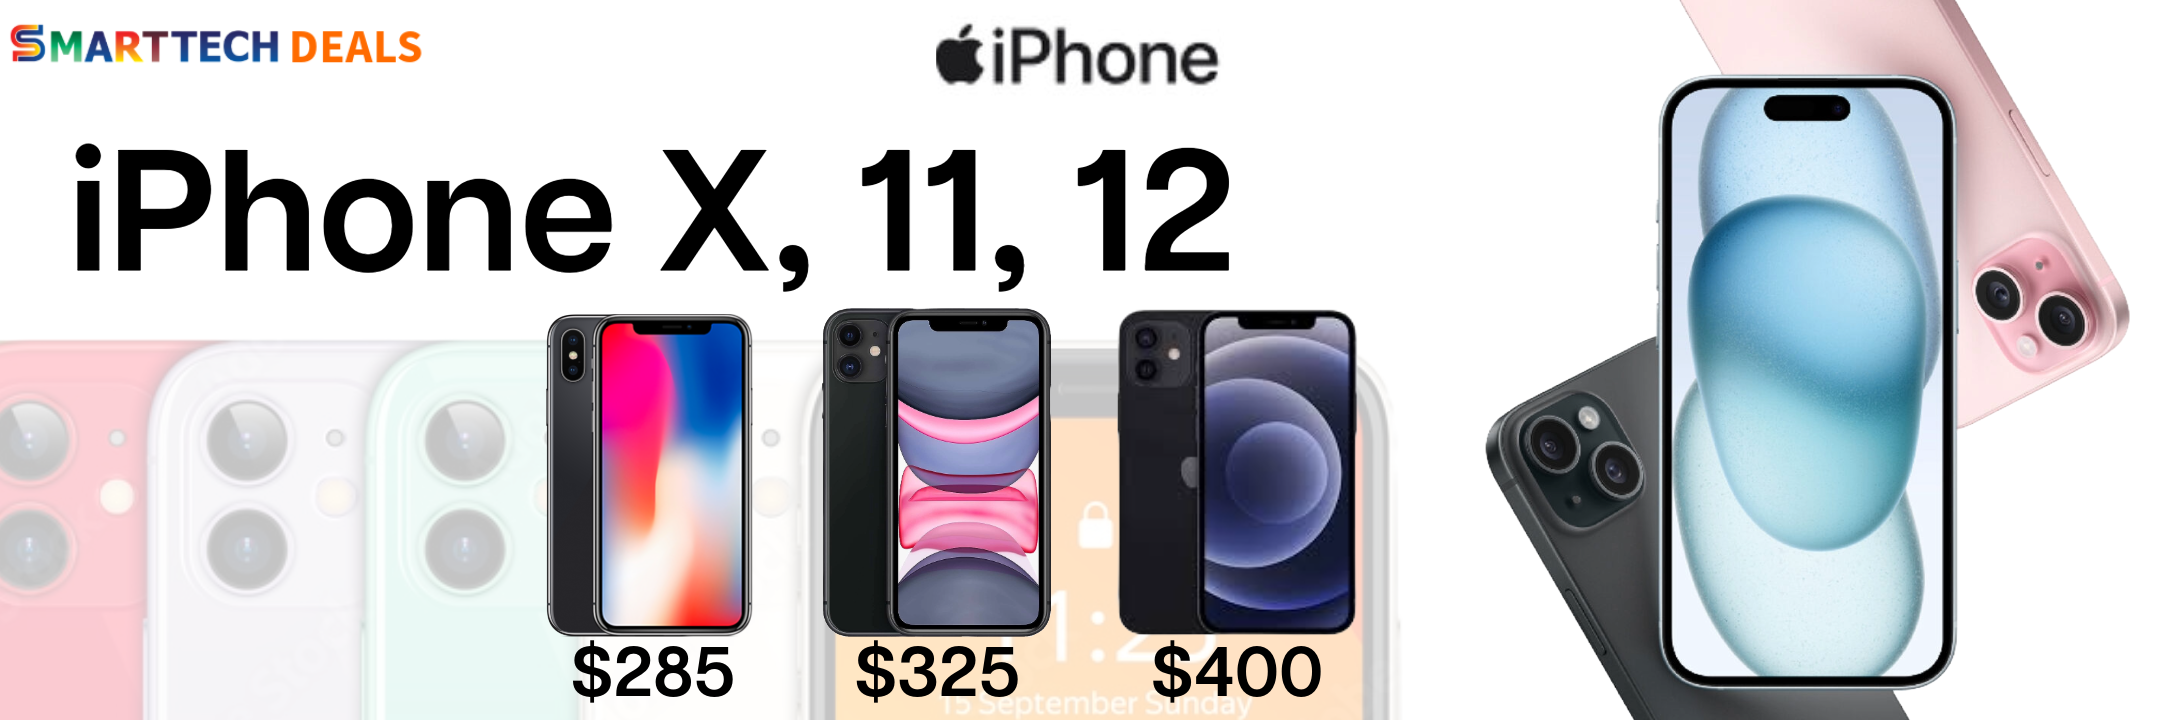 iPhone X, iPhone 11, iPhone 12 are on for great prices.